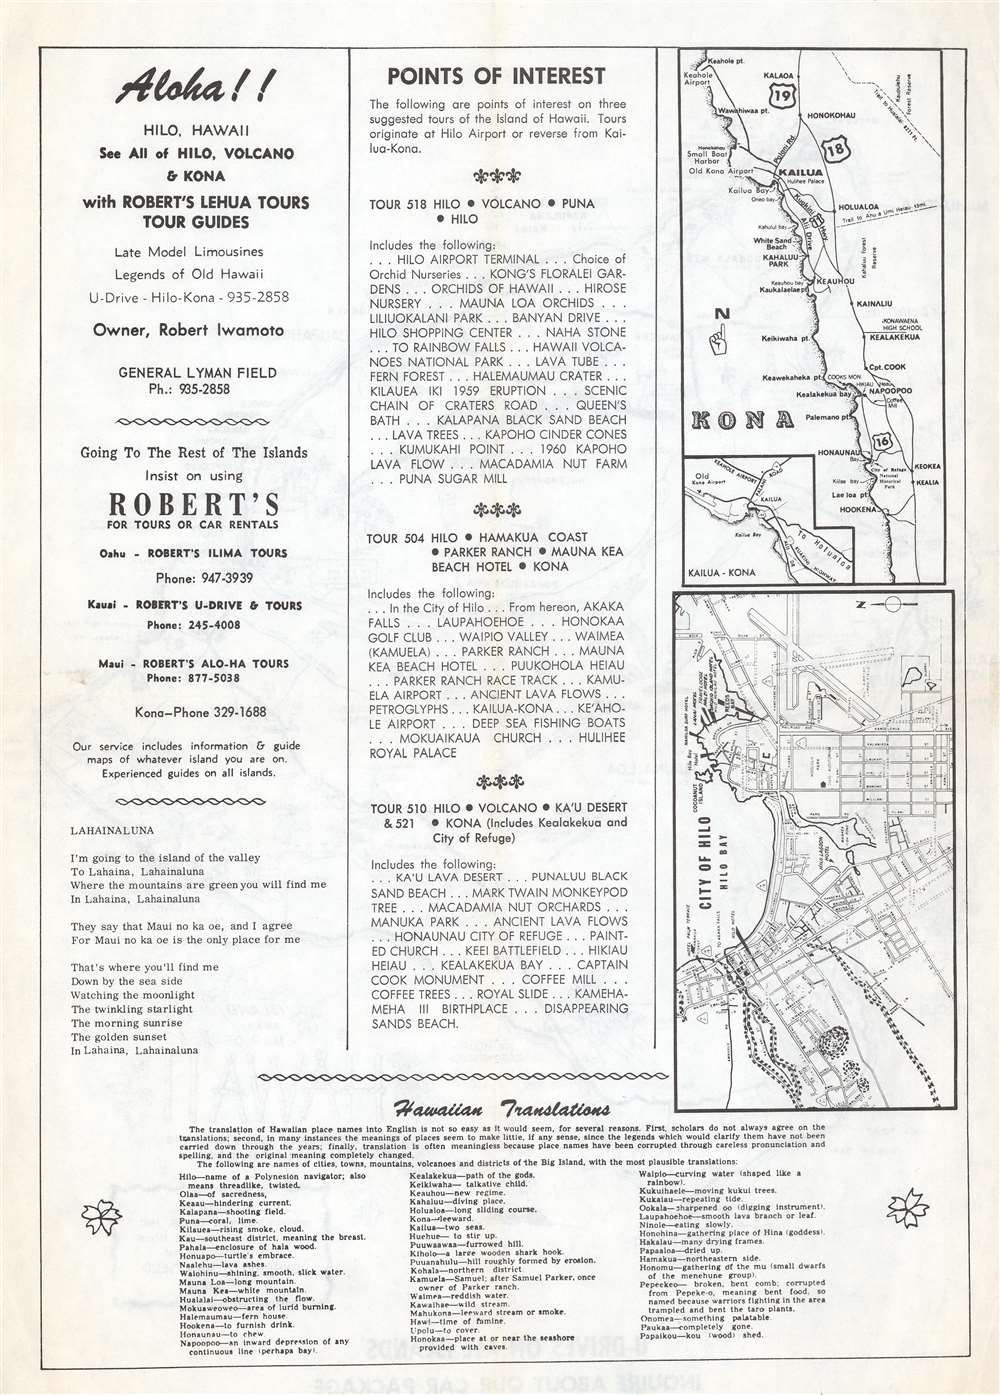 Island Road Map of Hawaii Showing roads, towns and chief scenic attractions. - Alternate View 1